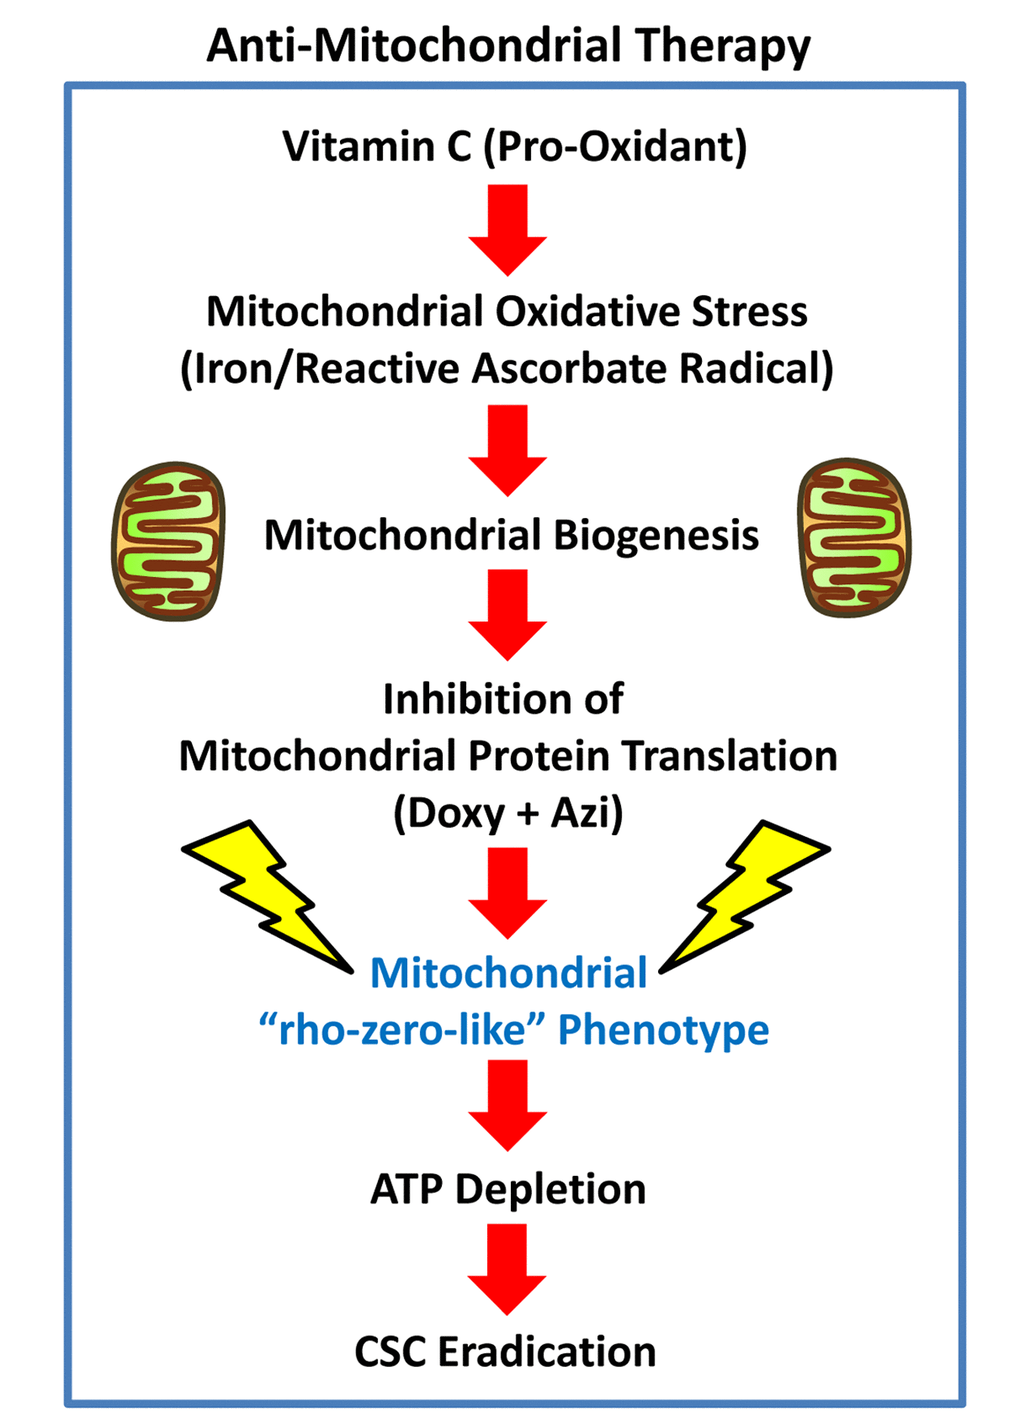 Anti-mitochondrial therapy. Vitamin C can act as a pro-oxidant, via the production of free radicals. The ascorbate radical is normally very stable, but becomes highly reactive in the presence of metal ions, including iron (Fe). As mitochondria are rich in iron, they could become a key target of the pro-oxidant effects of Vitamin C, sequentially driving first mitochondrial oxidative stress and then mitochondrial biogenesis. However, the use of inhibitors of mitochondrial protein translation, together with Vitamin C, would ultimately prevent CSC mitochondria from fully recovering, leading instead to CSC eradication. Additional experimentation will be required to further test this hypothesis.